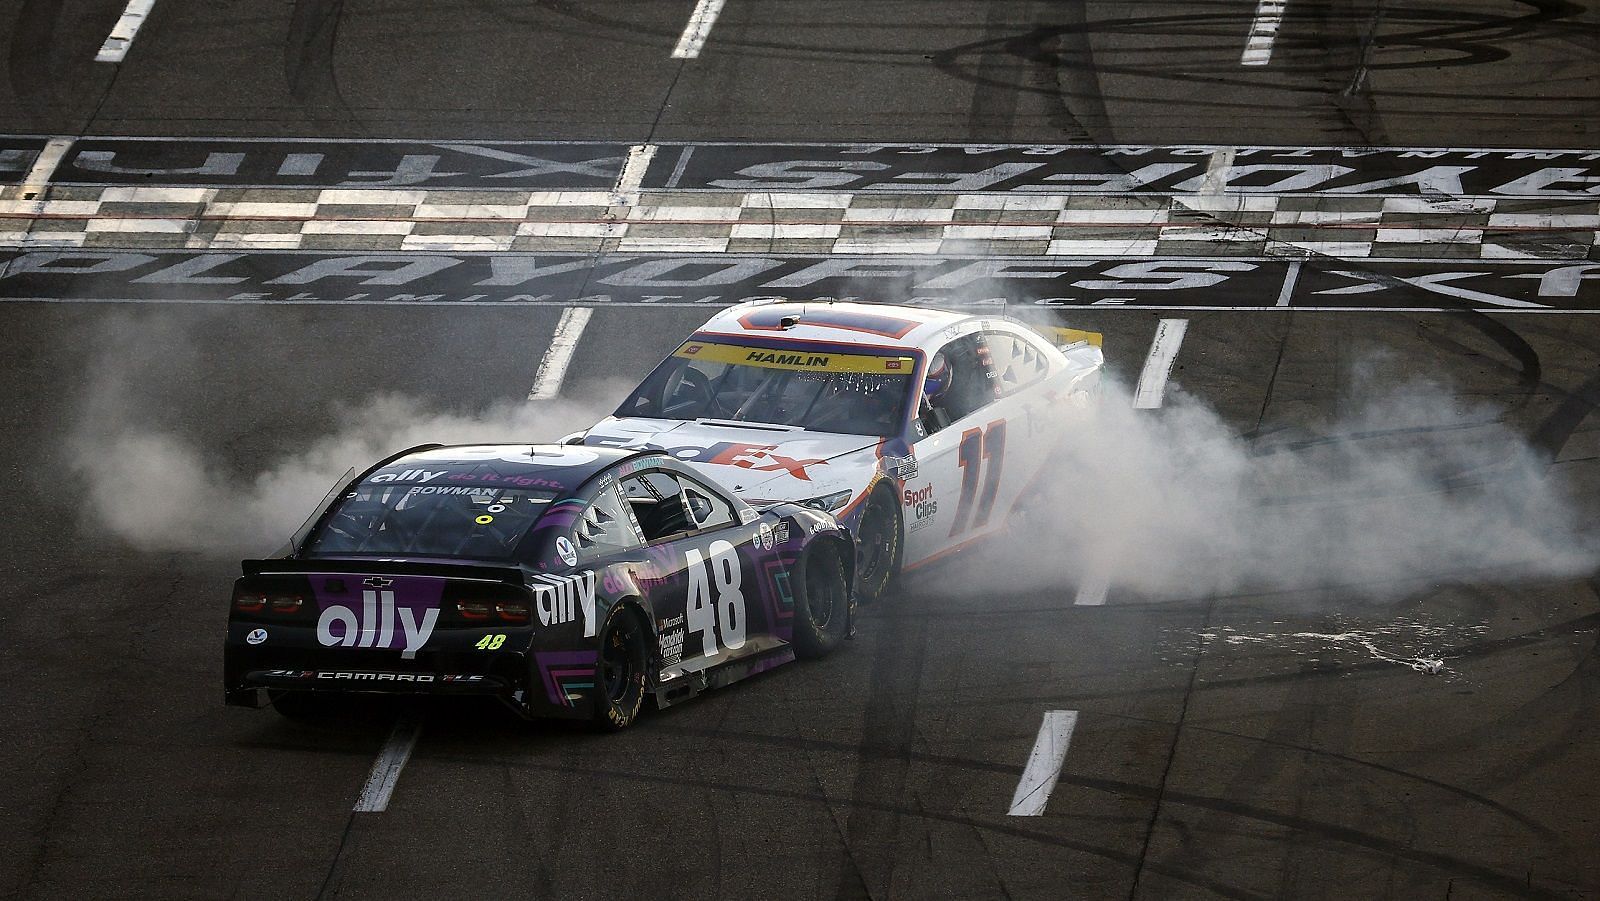 Alex Bowman (#48) and Denny Hamlin (#11) during the 2021 NASCAR Cup Series race at Martinsville Speedway. Picture Courtesy: sportscasting.com